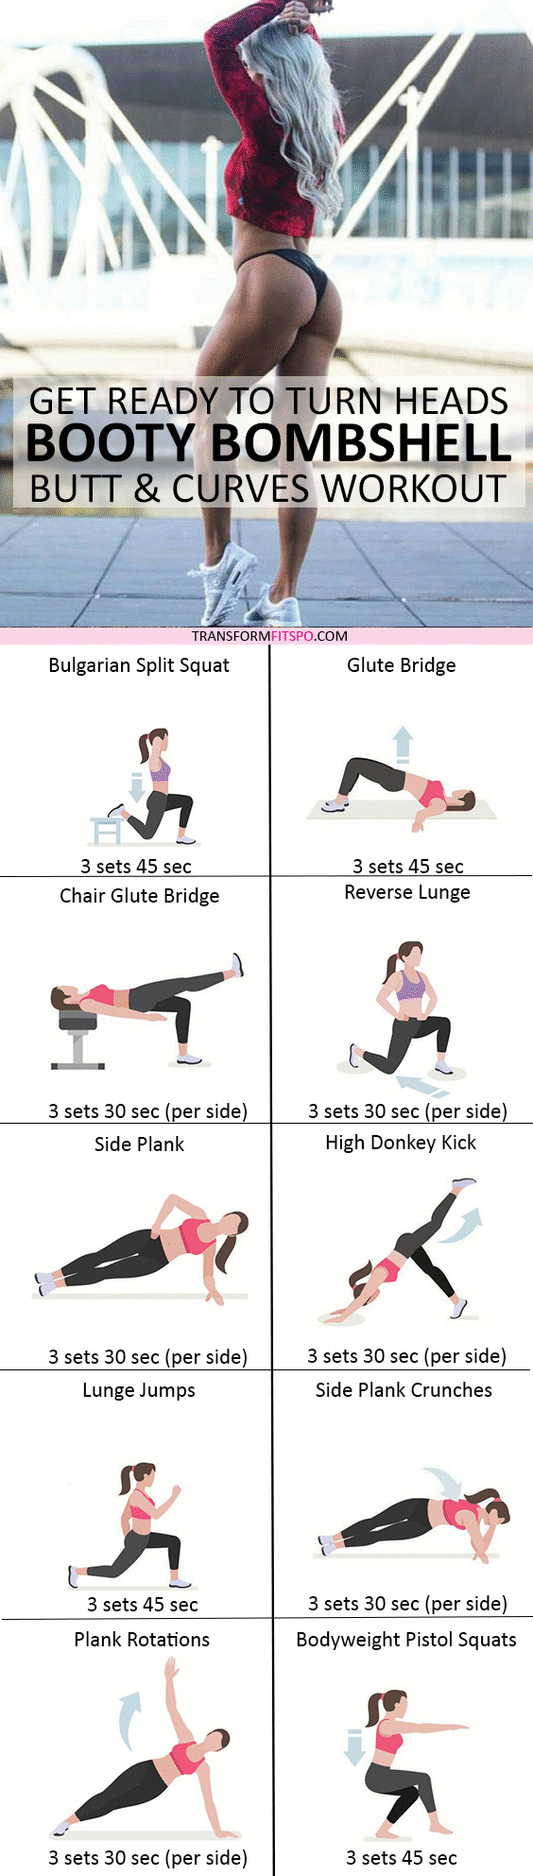 18 At Home Butt Workouts To Lift And Shape Your Booty! - TrimmedandToned